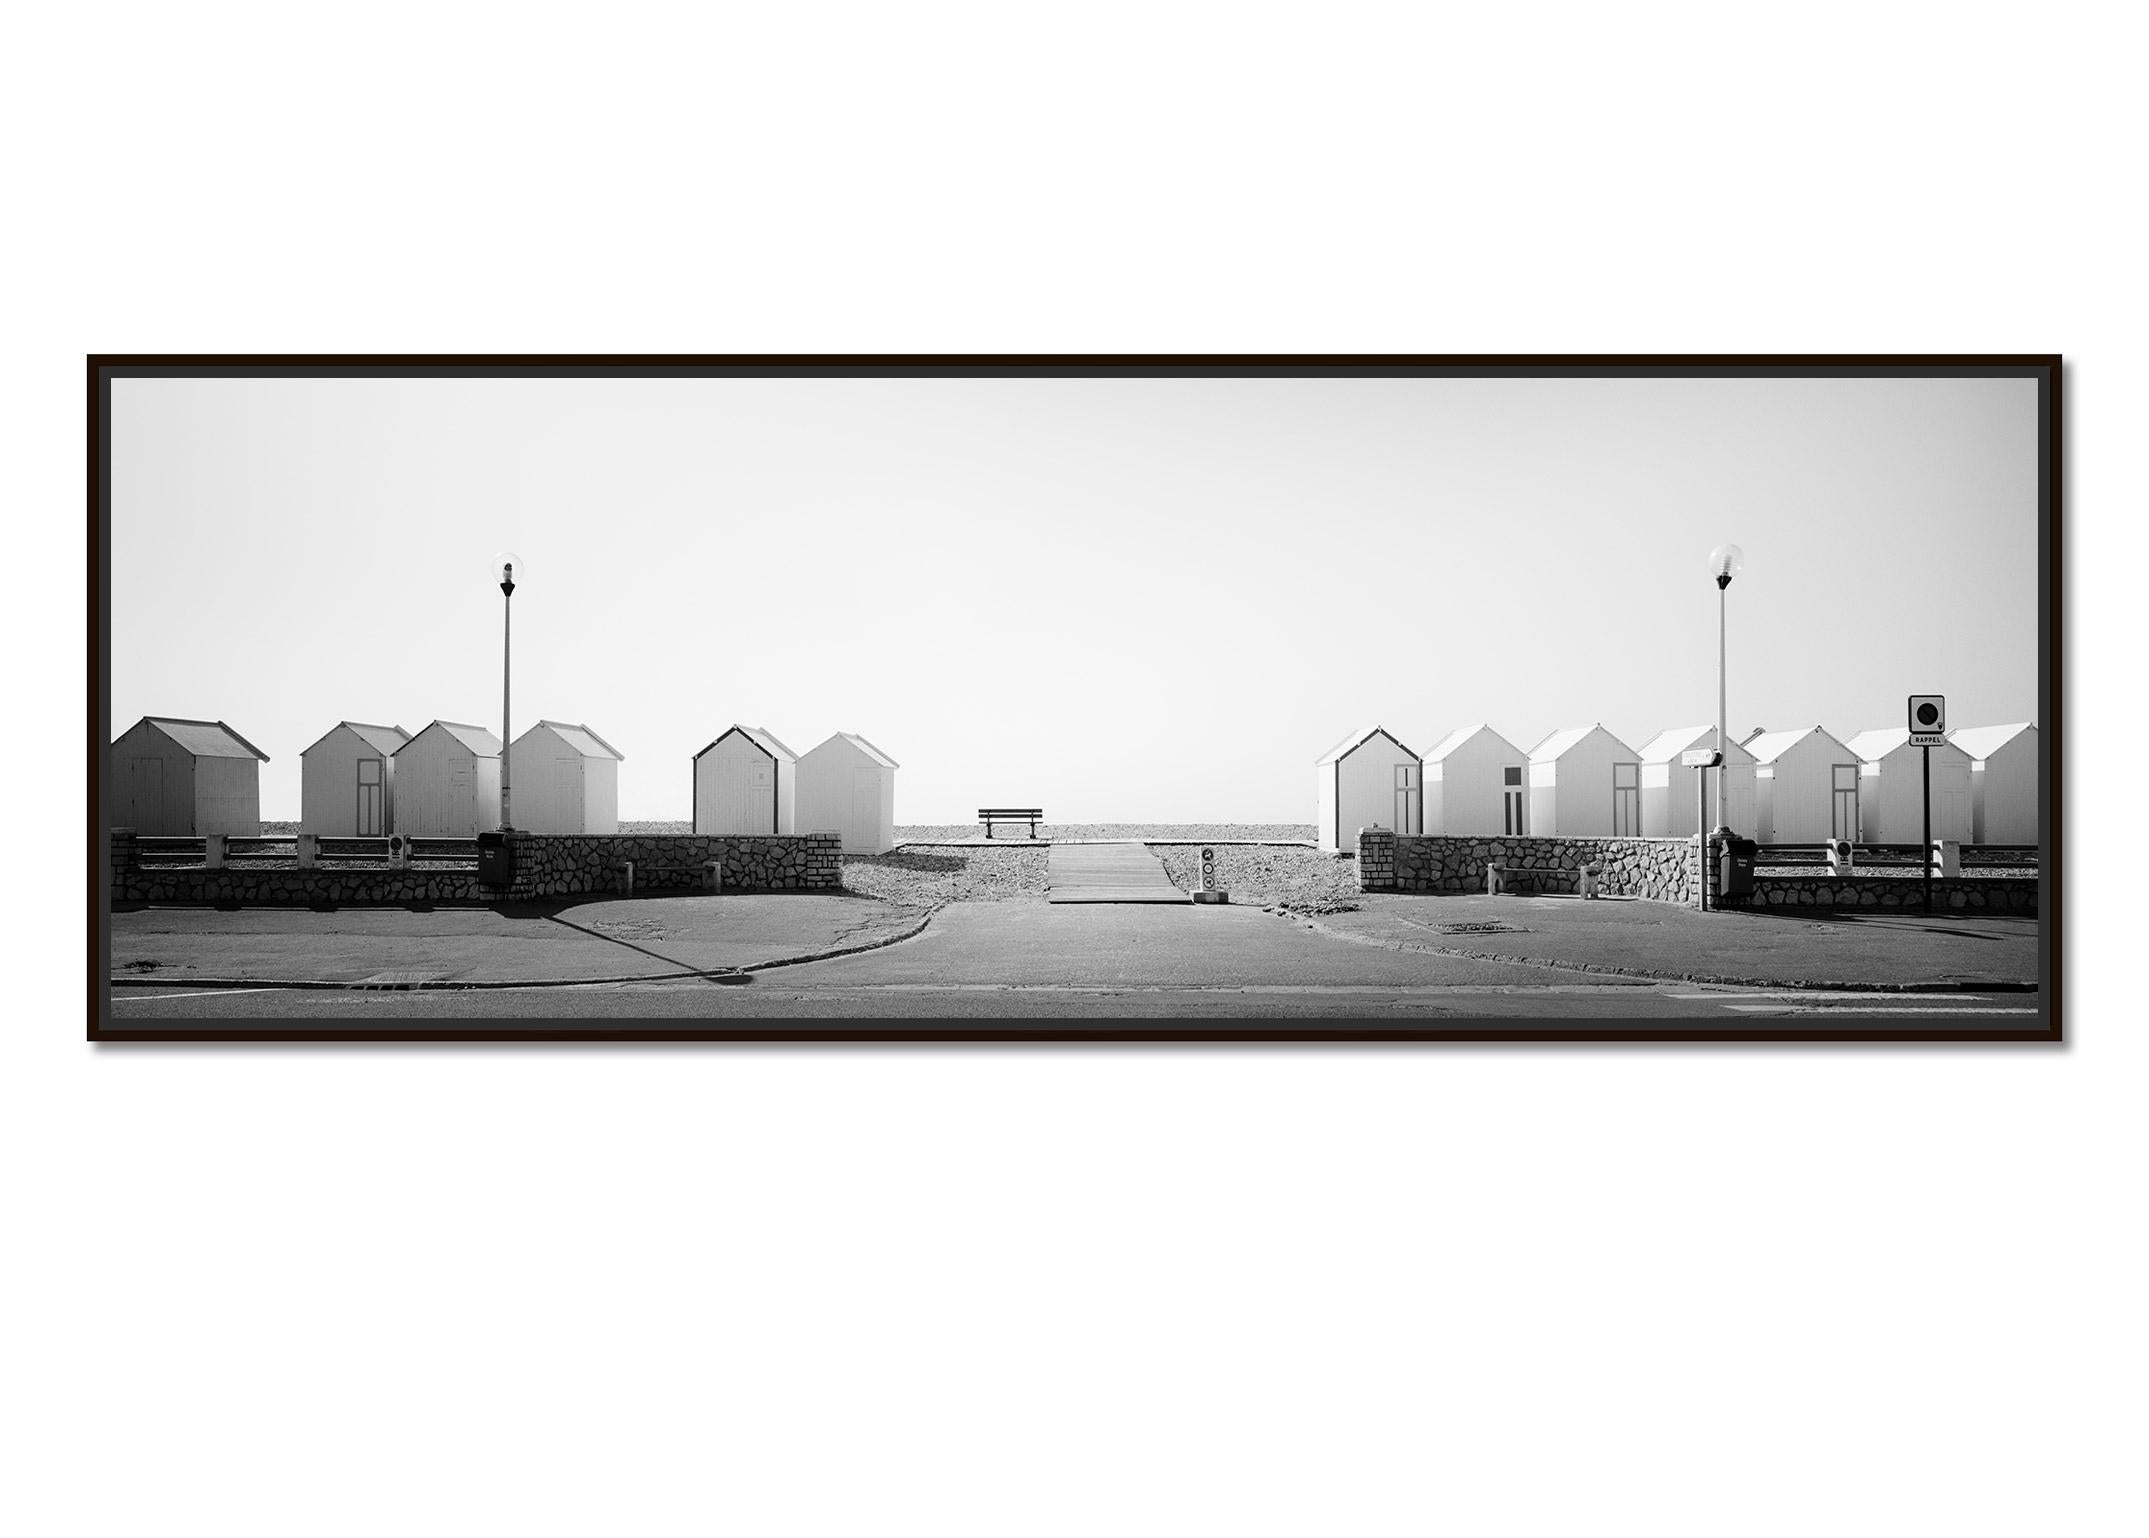 Beach Huts Panorama Cayeux-sur-Mer France black white landscape art photography - Contemporary Photograph by Gerald Berghammer